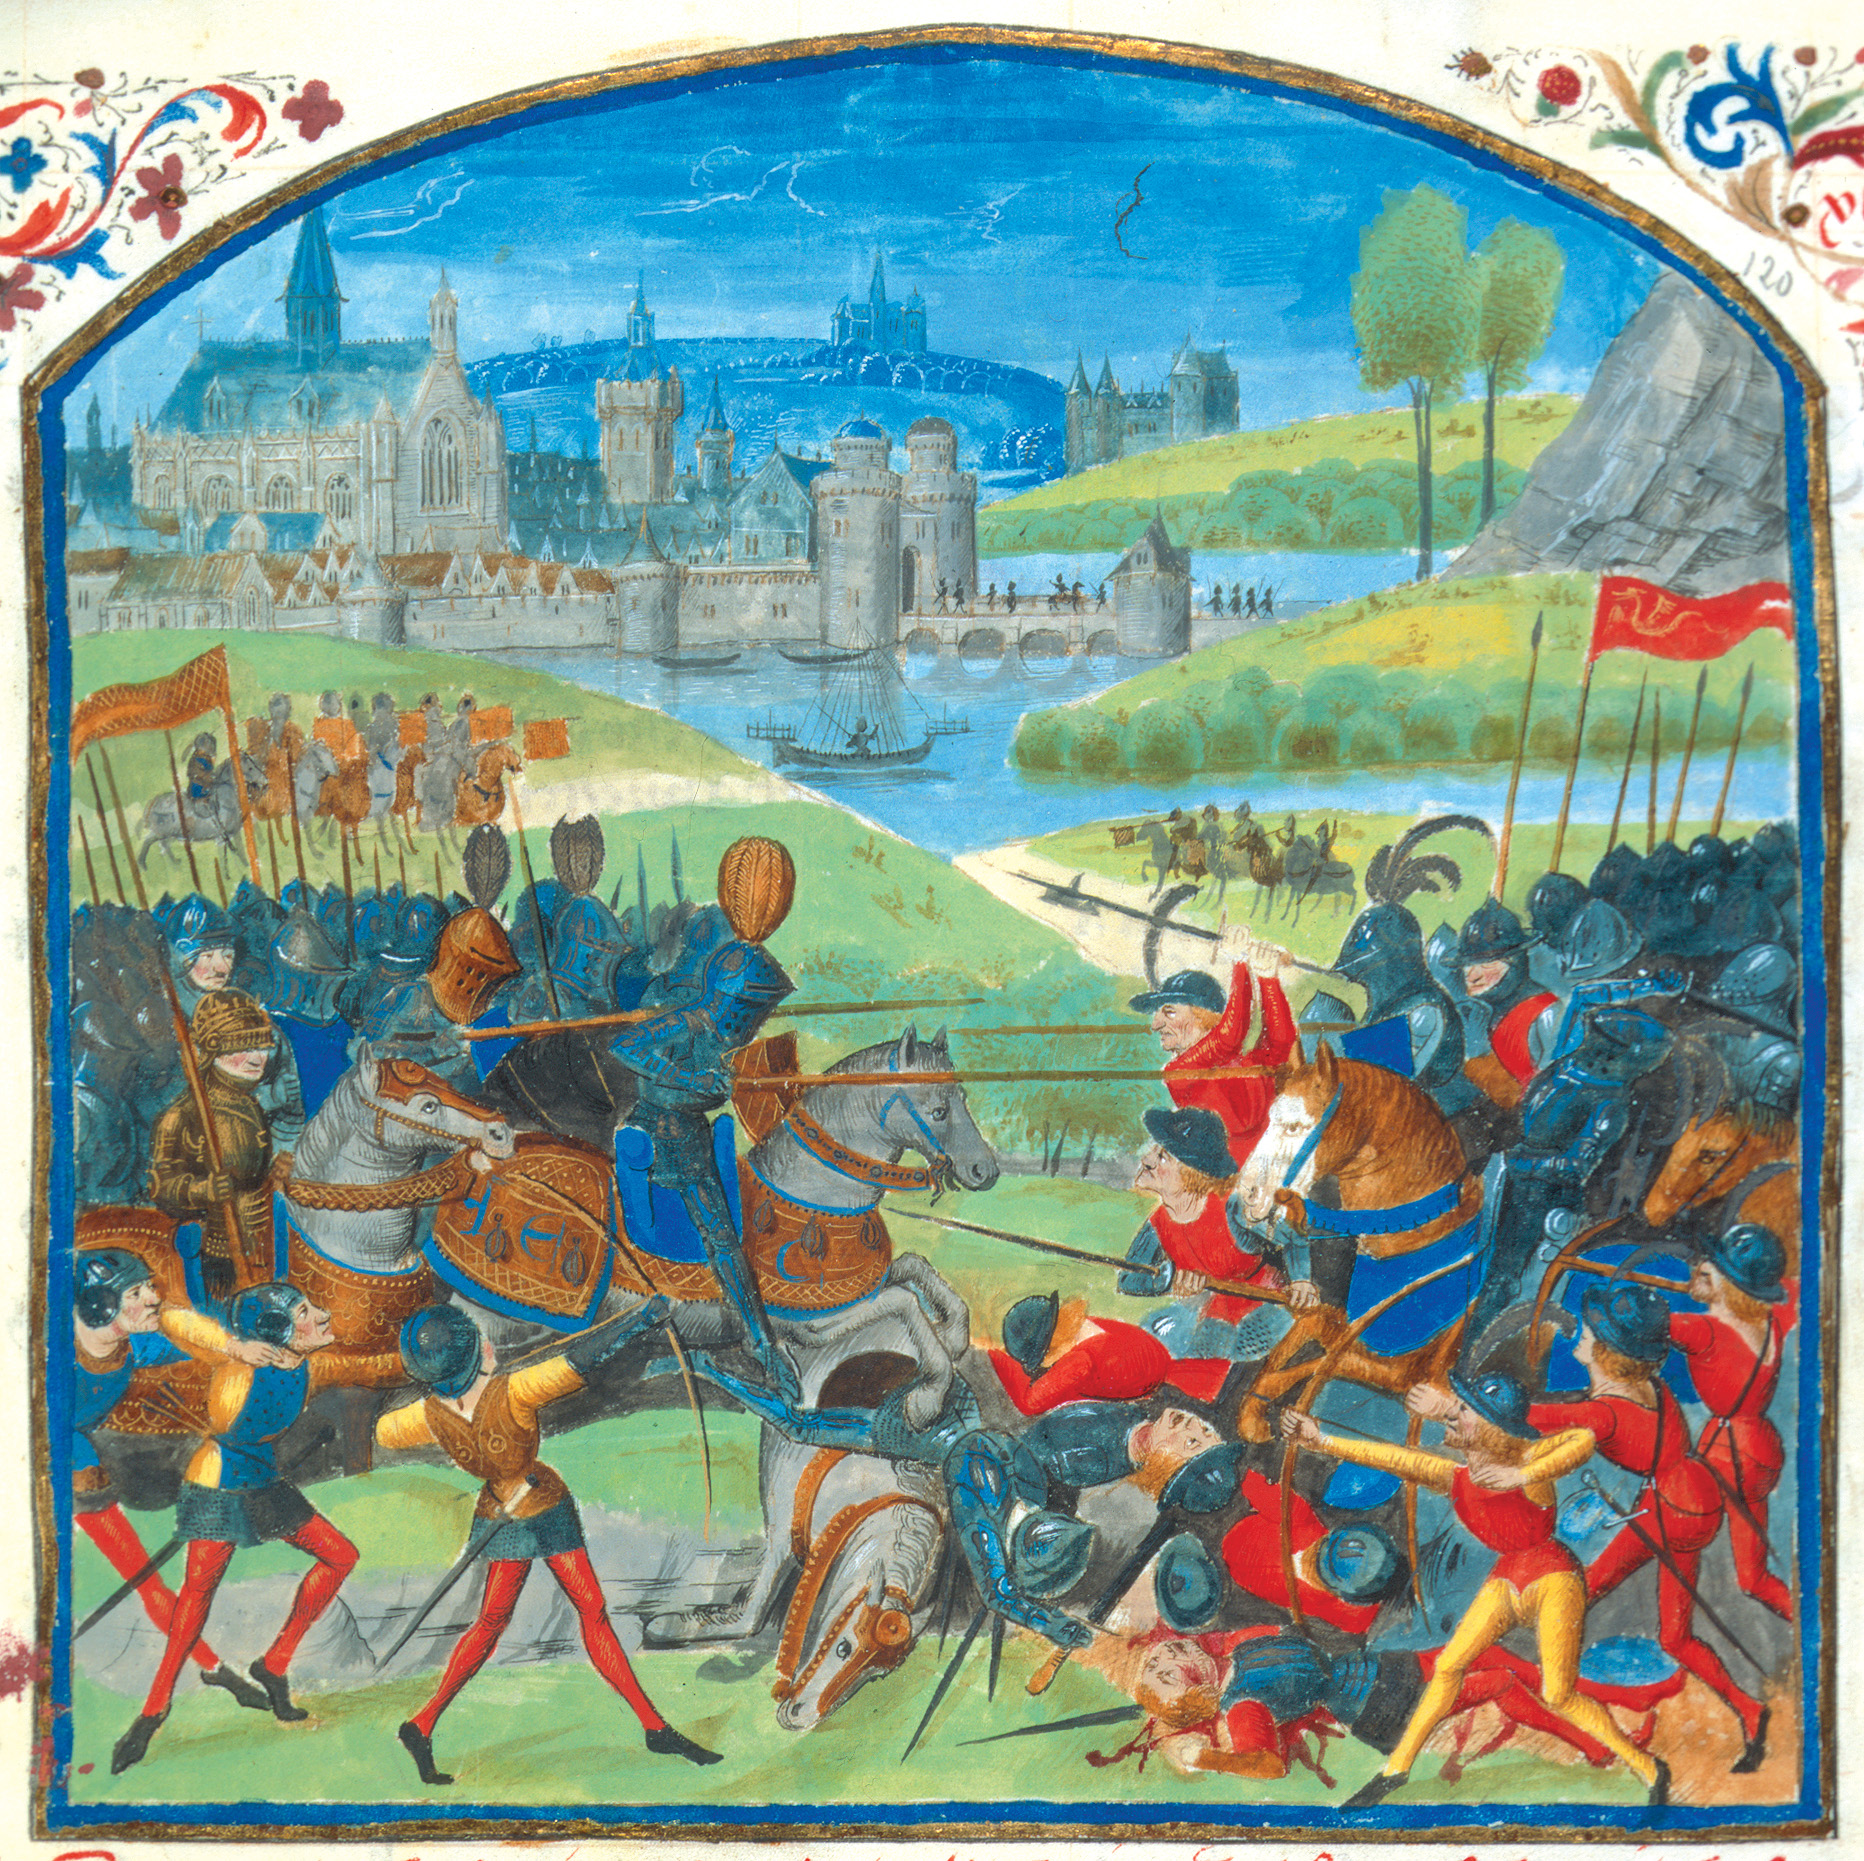 A 15th-century illustration of Caesar defeating the Suebi. Caesar brought them to battle when they were psychologically vulnerable. 